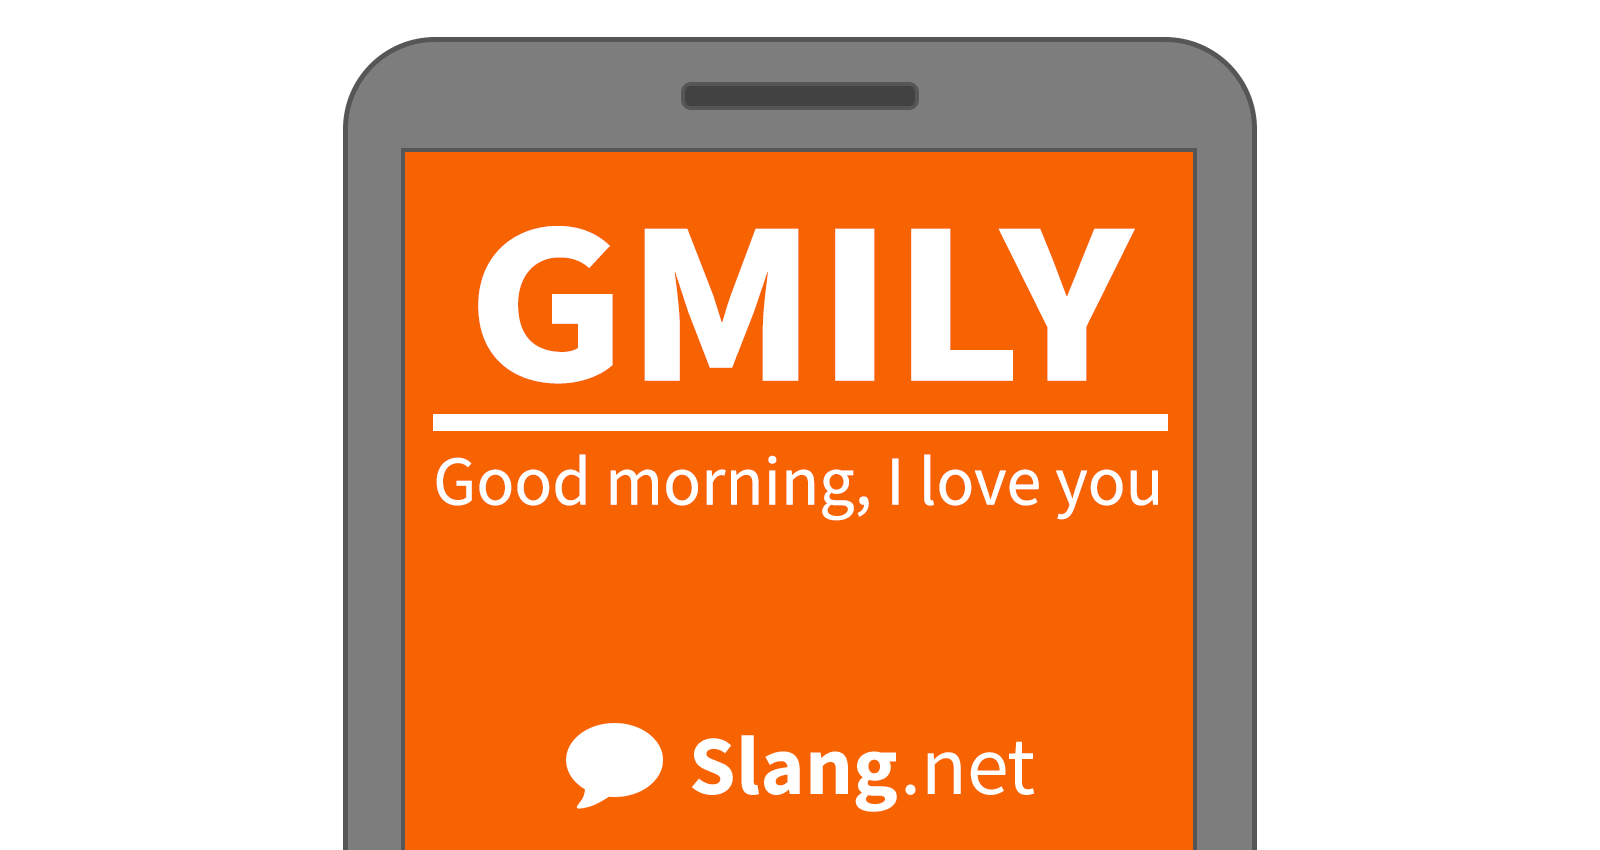 GMILY stands for &quot;good morning, I love you&quot;